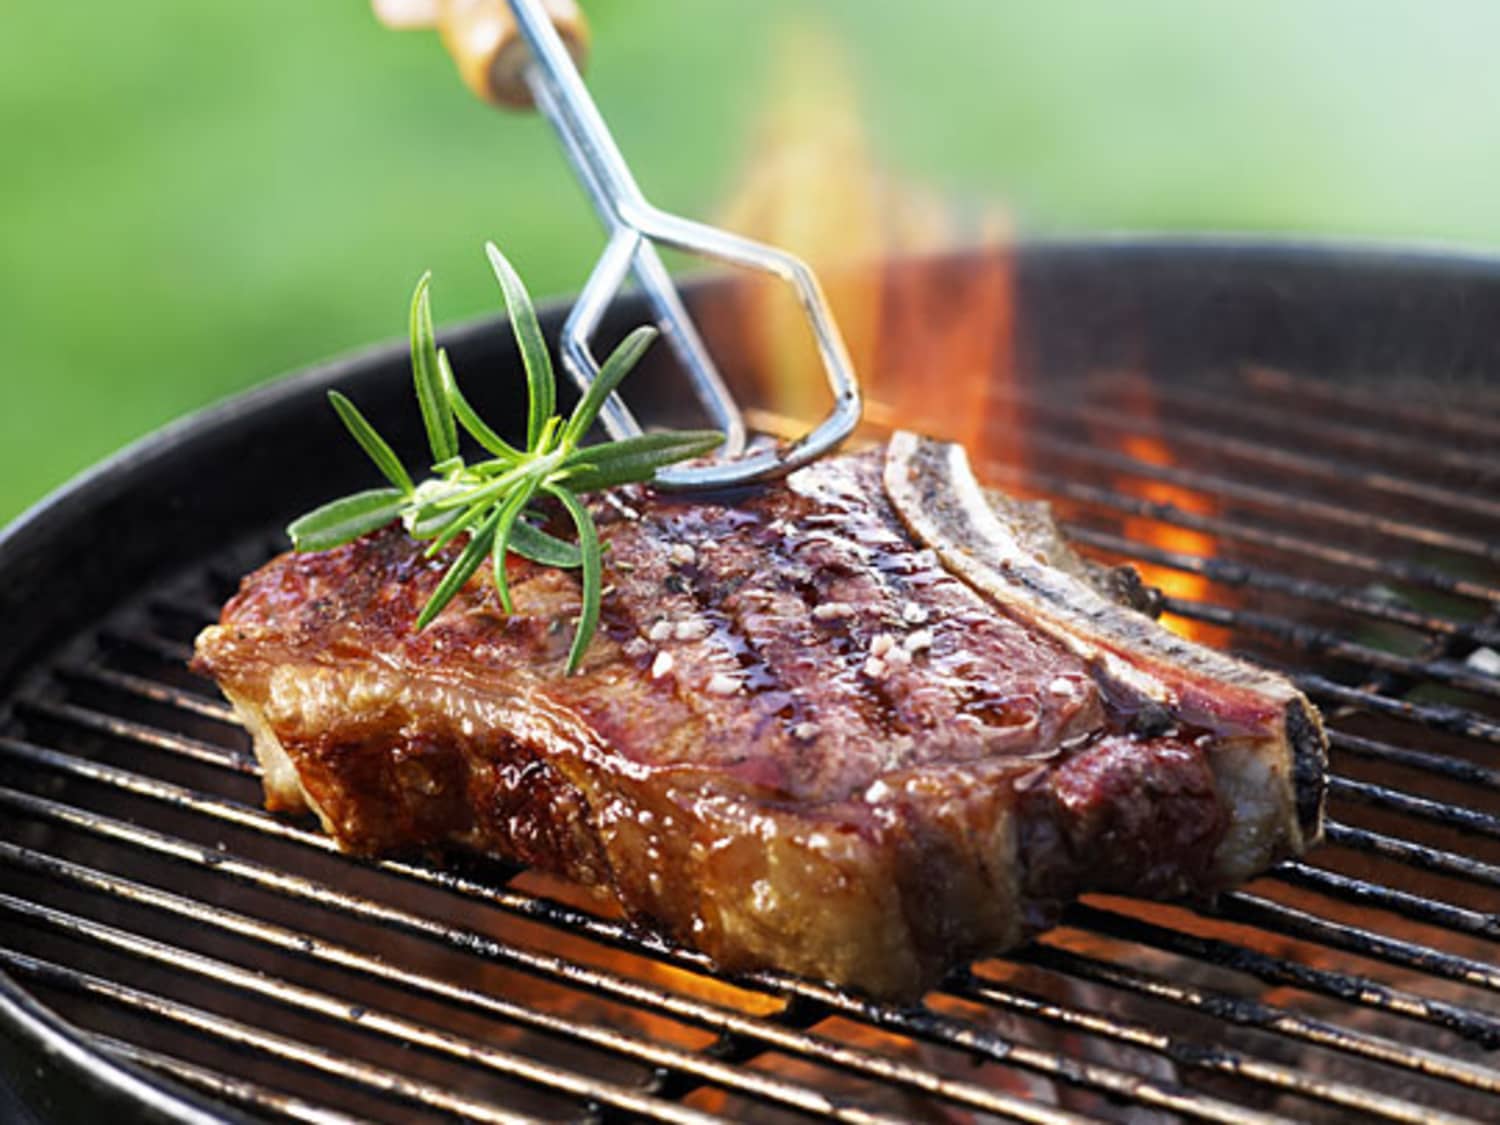 How to Grill Steak - Easy Guide to Grilled Steak